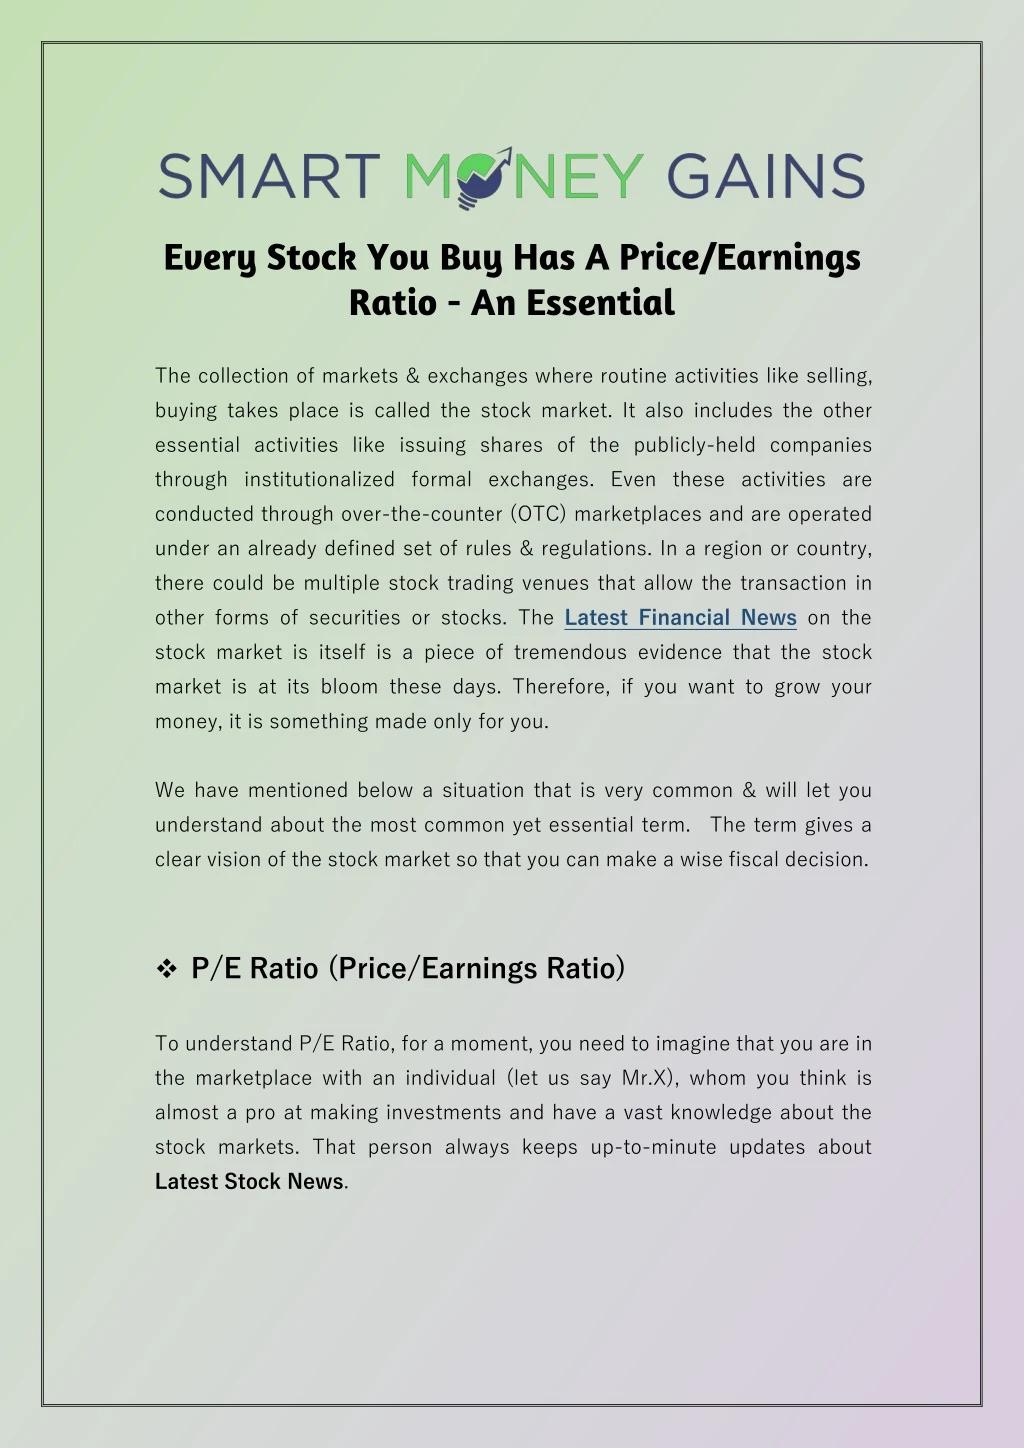 every stock you buy has a price earnings ratio